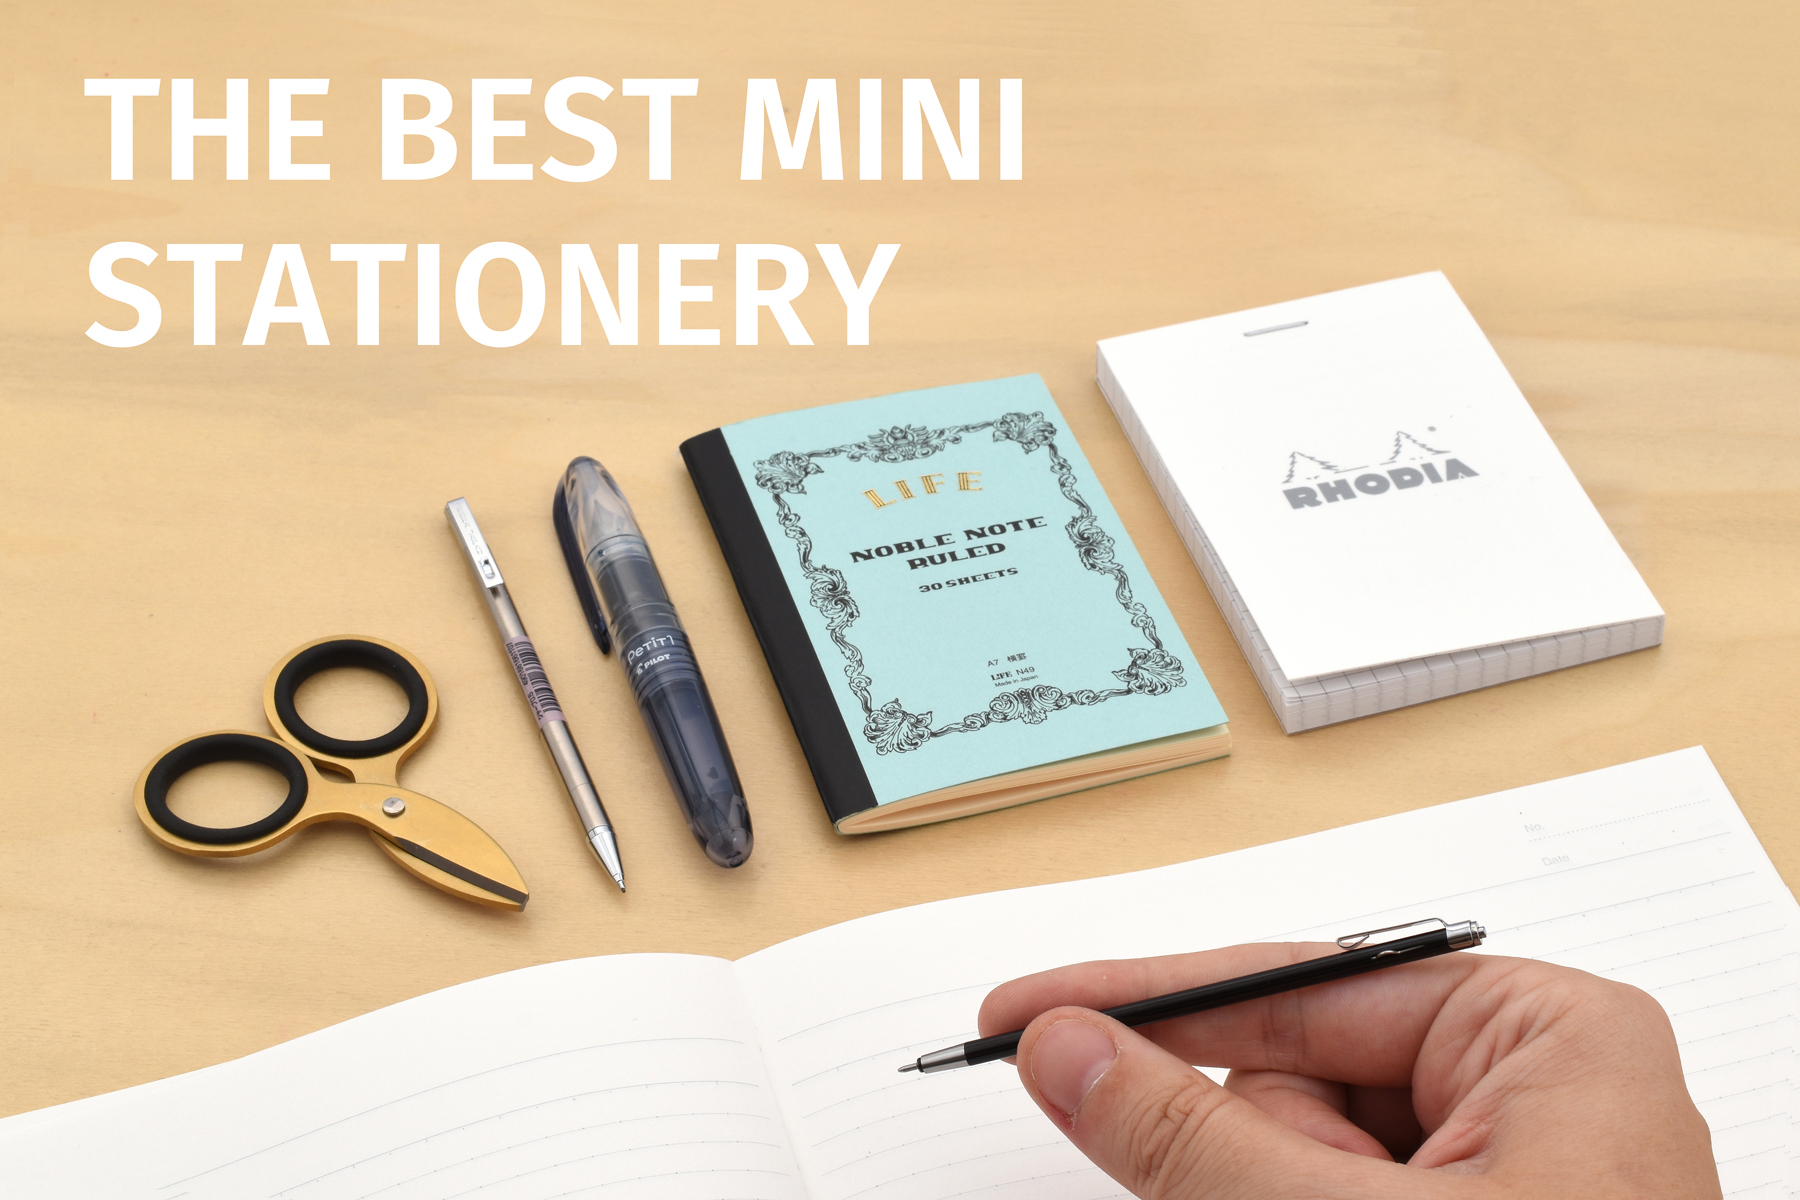 The Best Mini Stationery